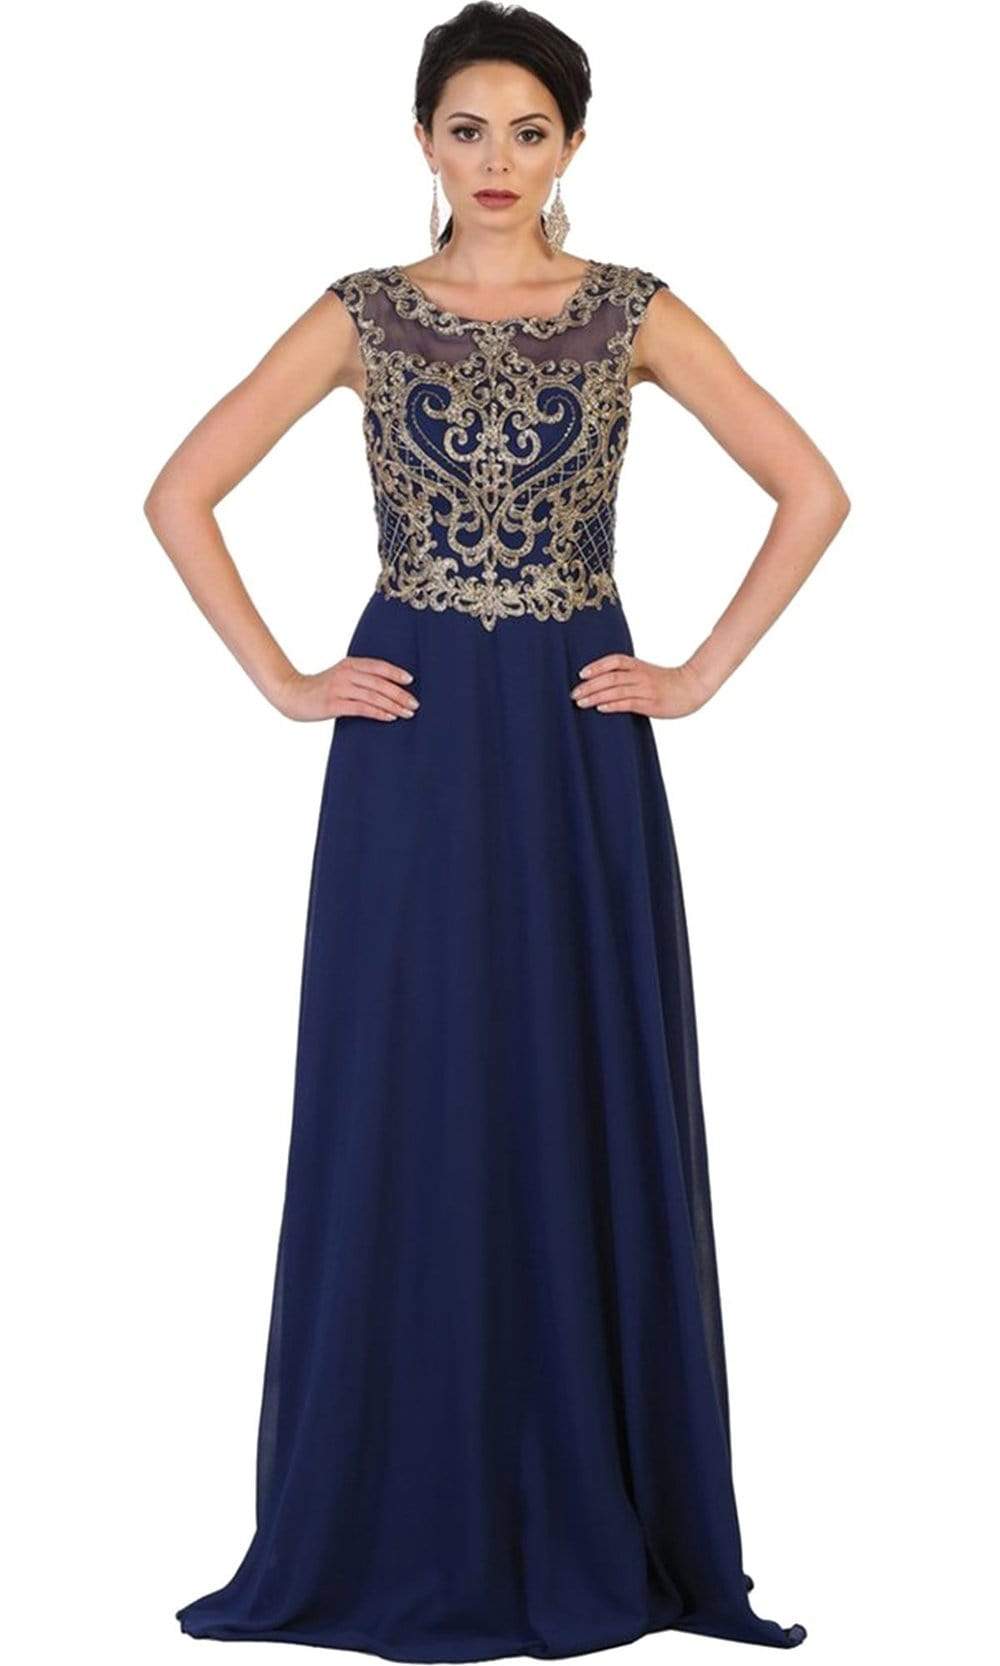 May Queen - Embroidered Illusion Jewel A-line Evening Dress
